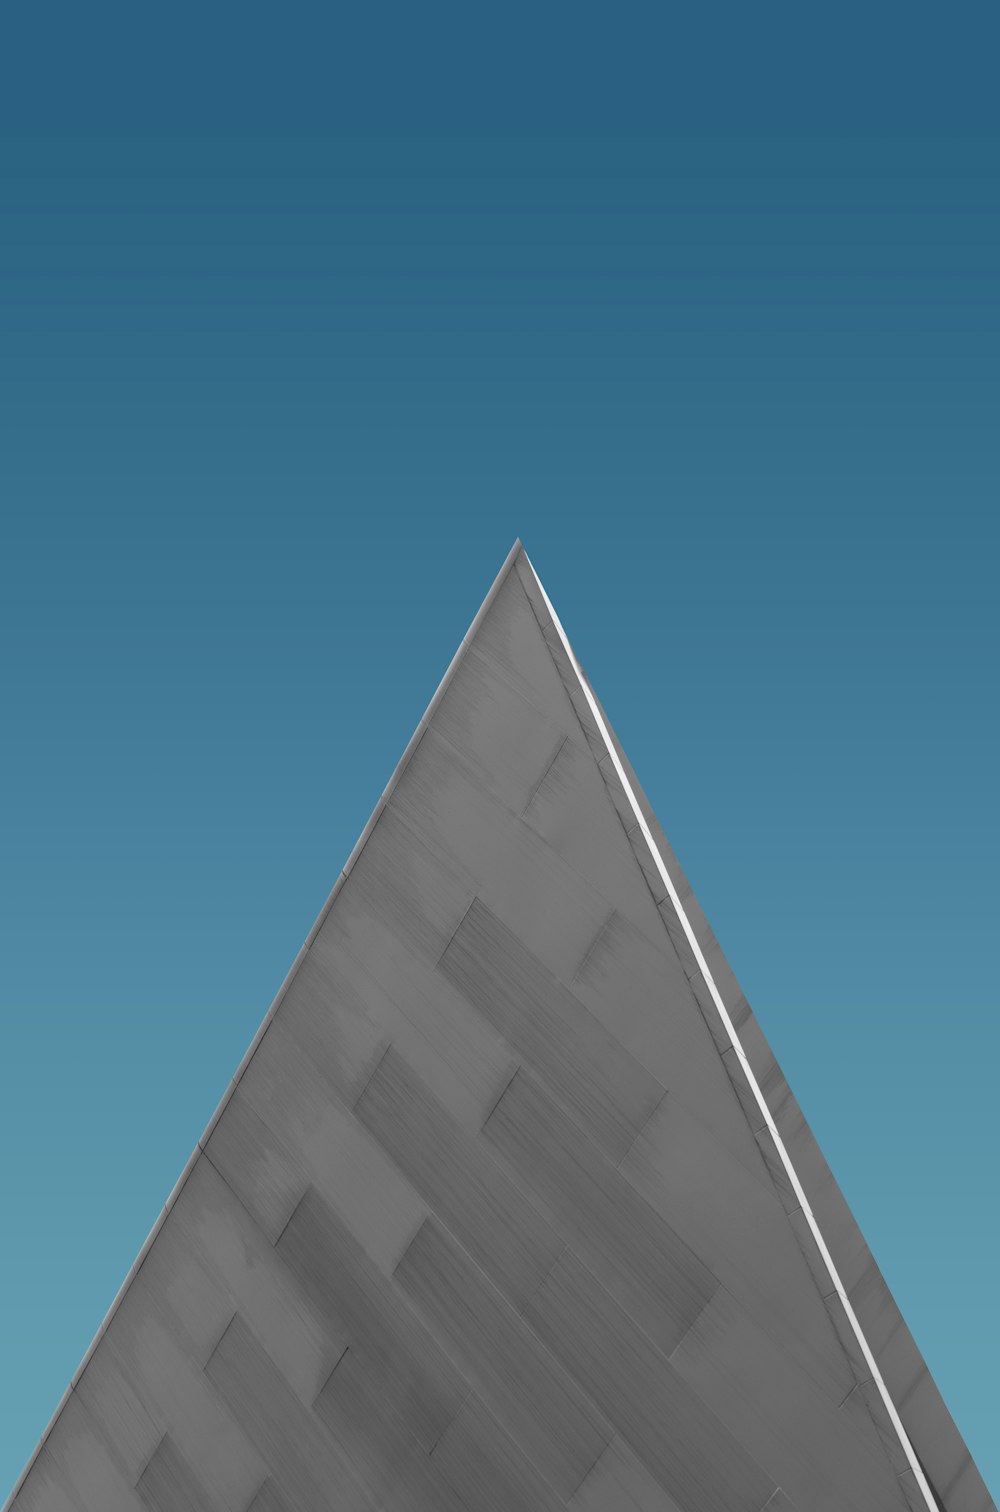 a triangle shaped object with a blue sky in the background